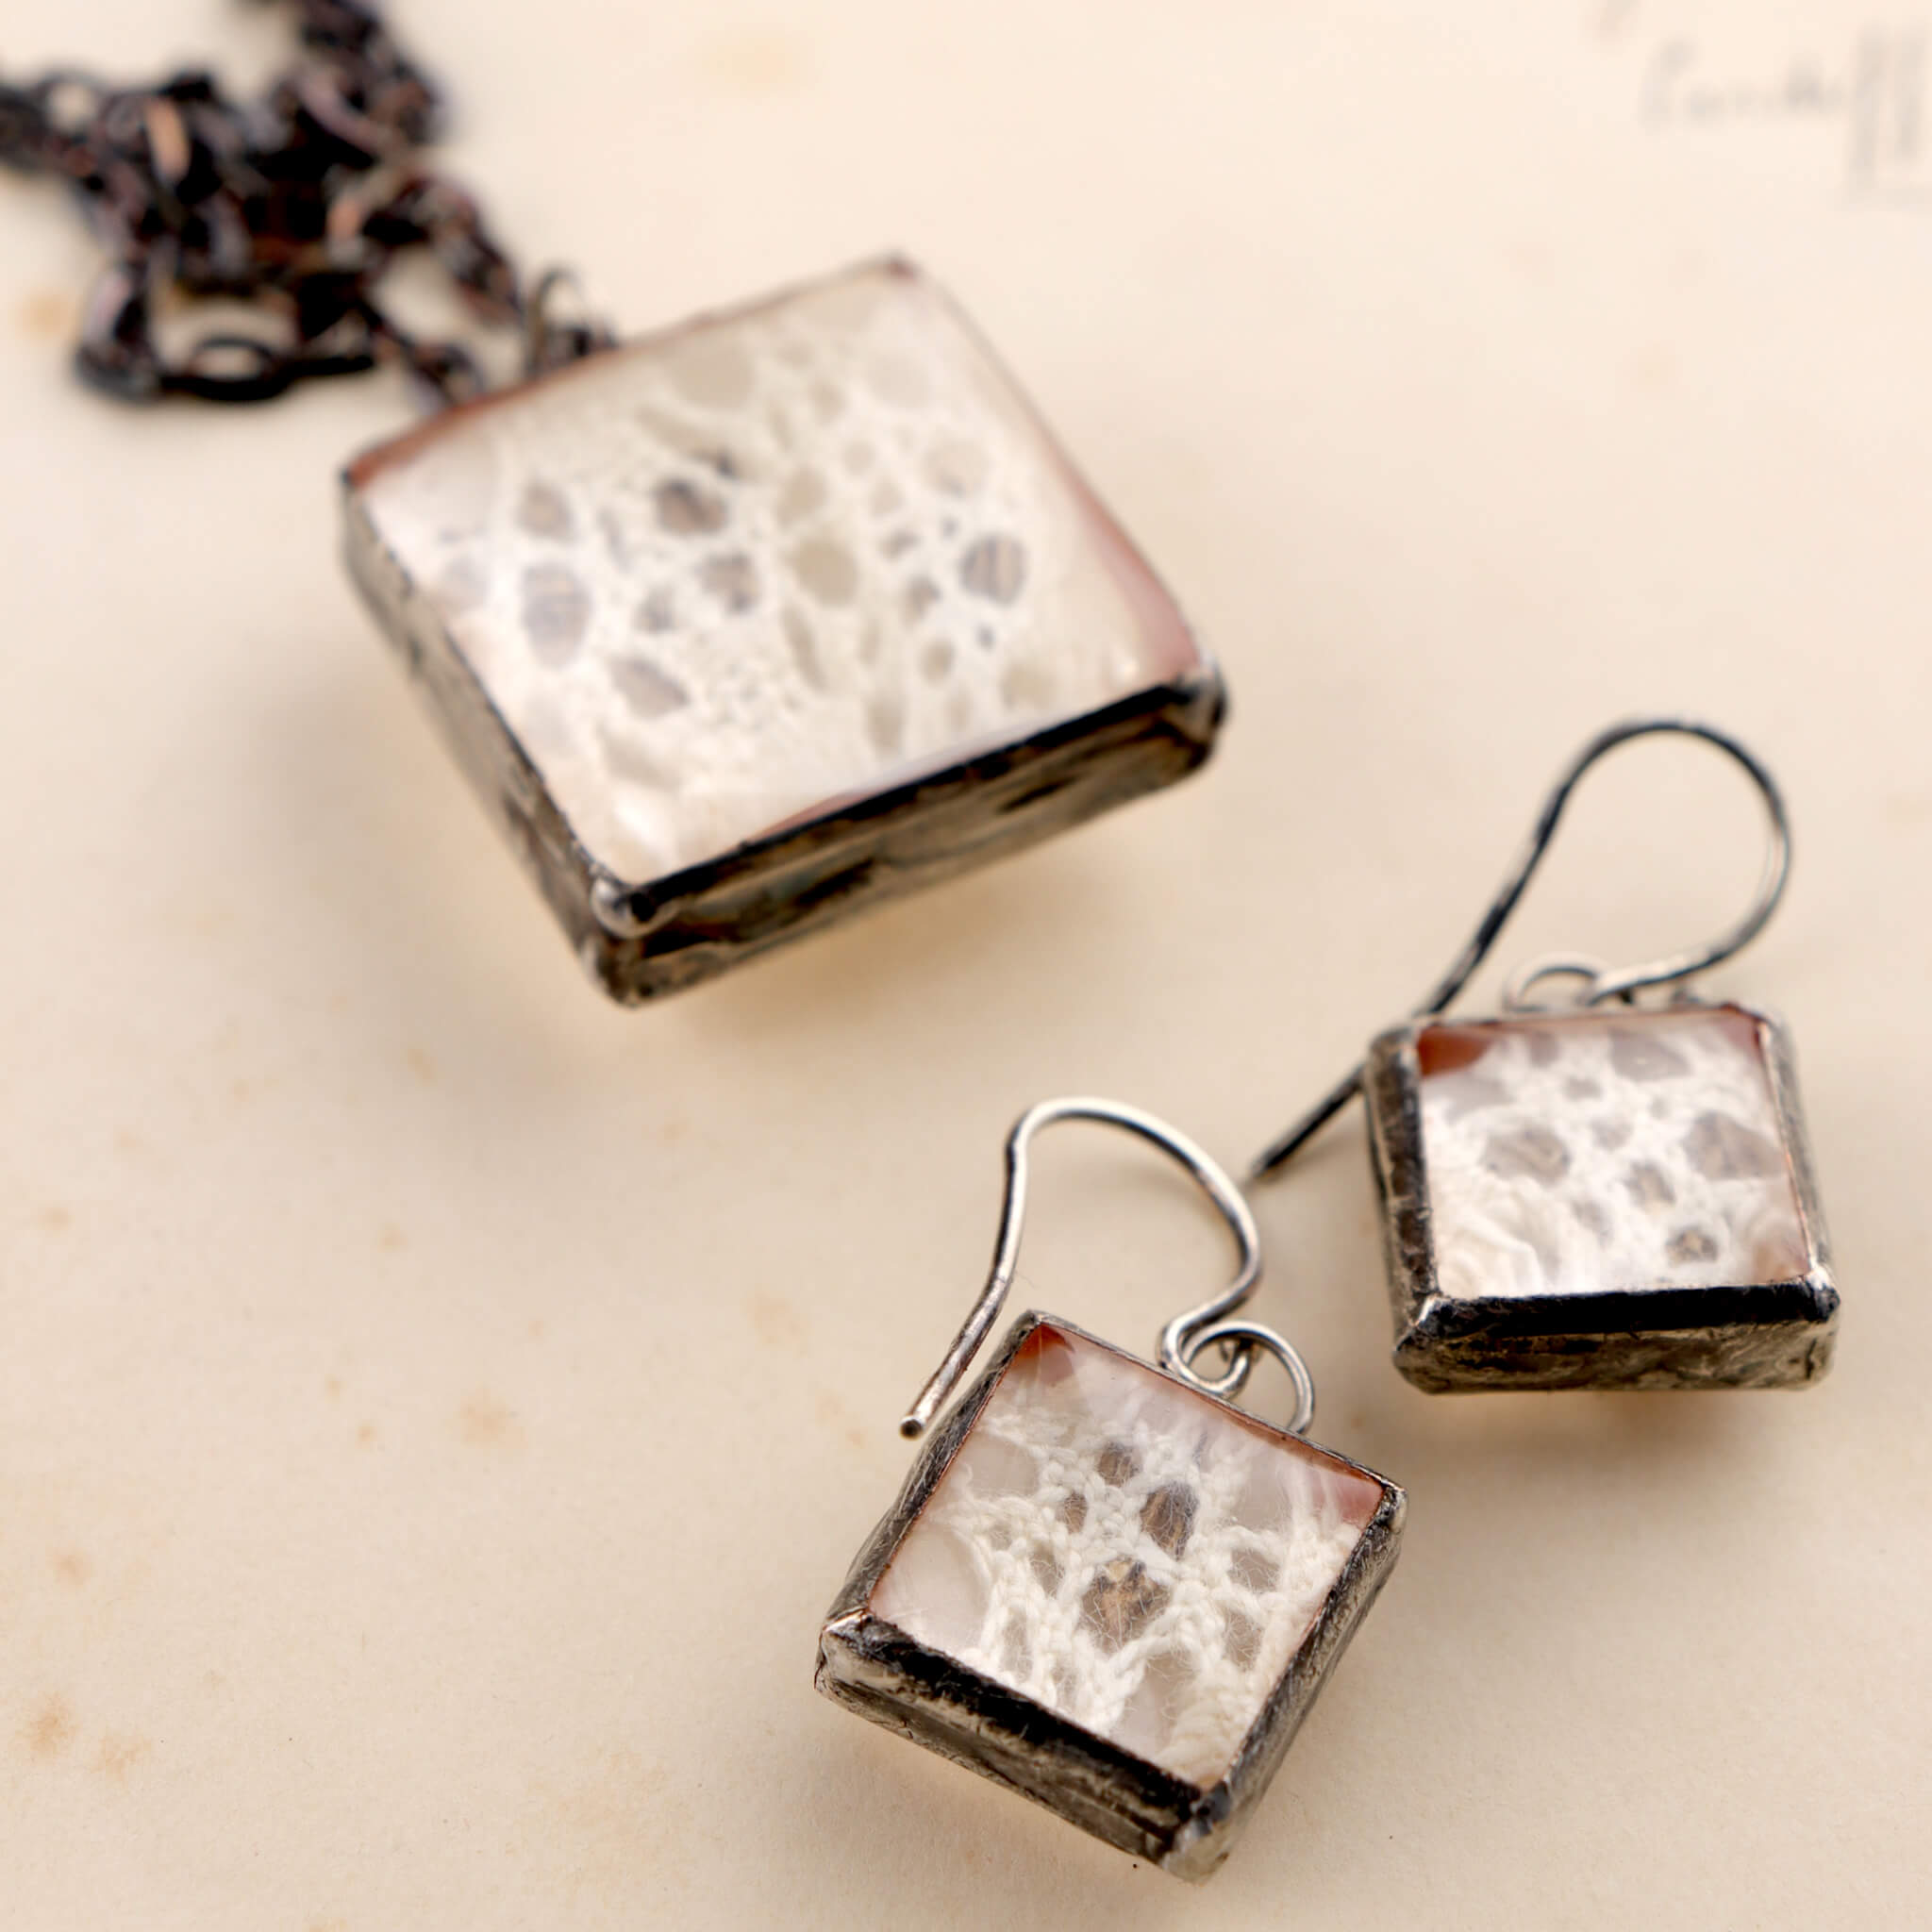 Square soldered jewellery set with vintage lase and pressed flowers lying on an old letter